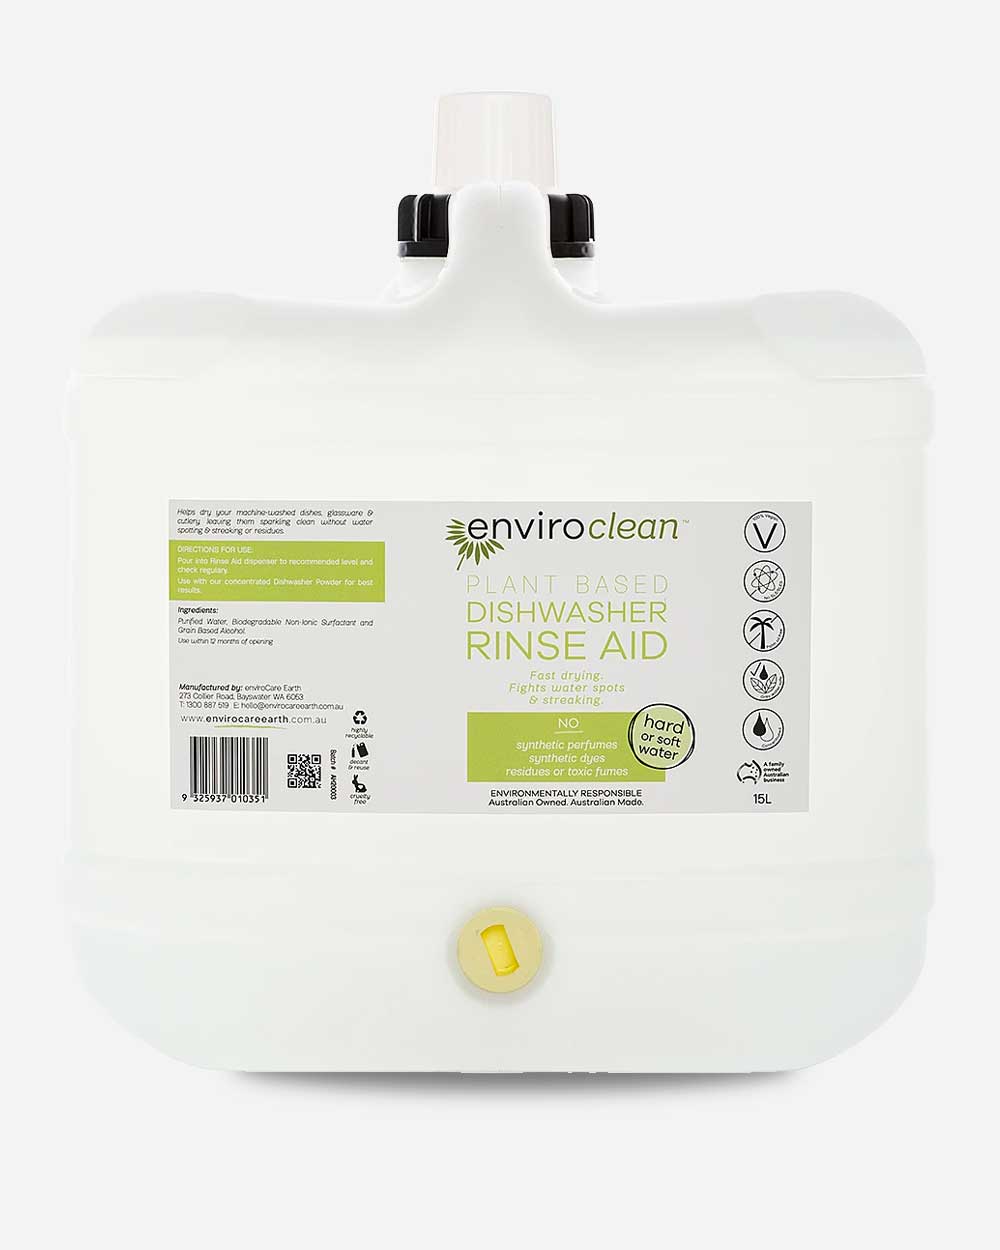 What is Rinse Aid, and why do I need it? - Reviewed